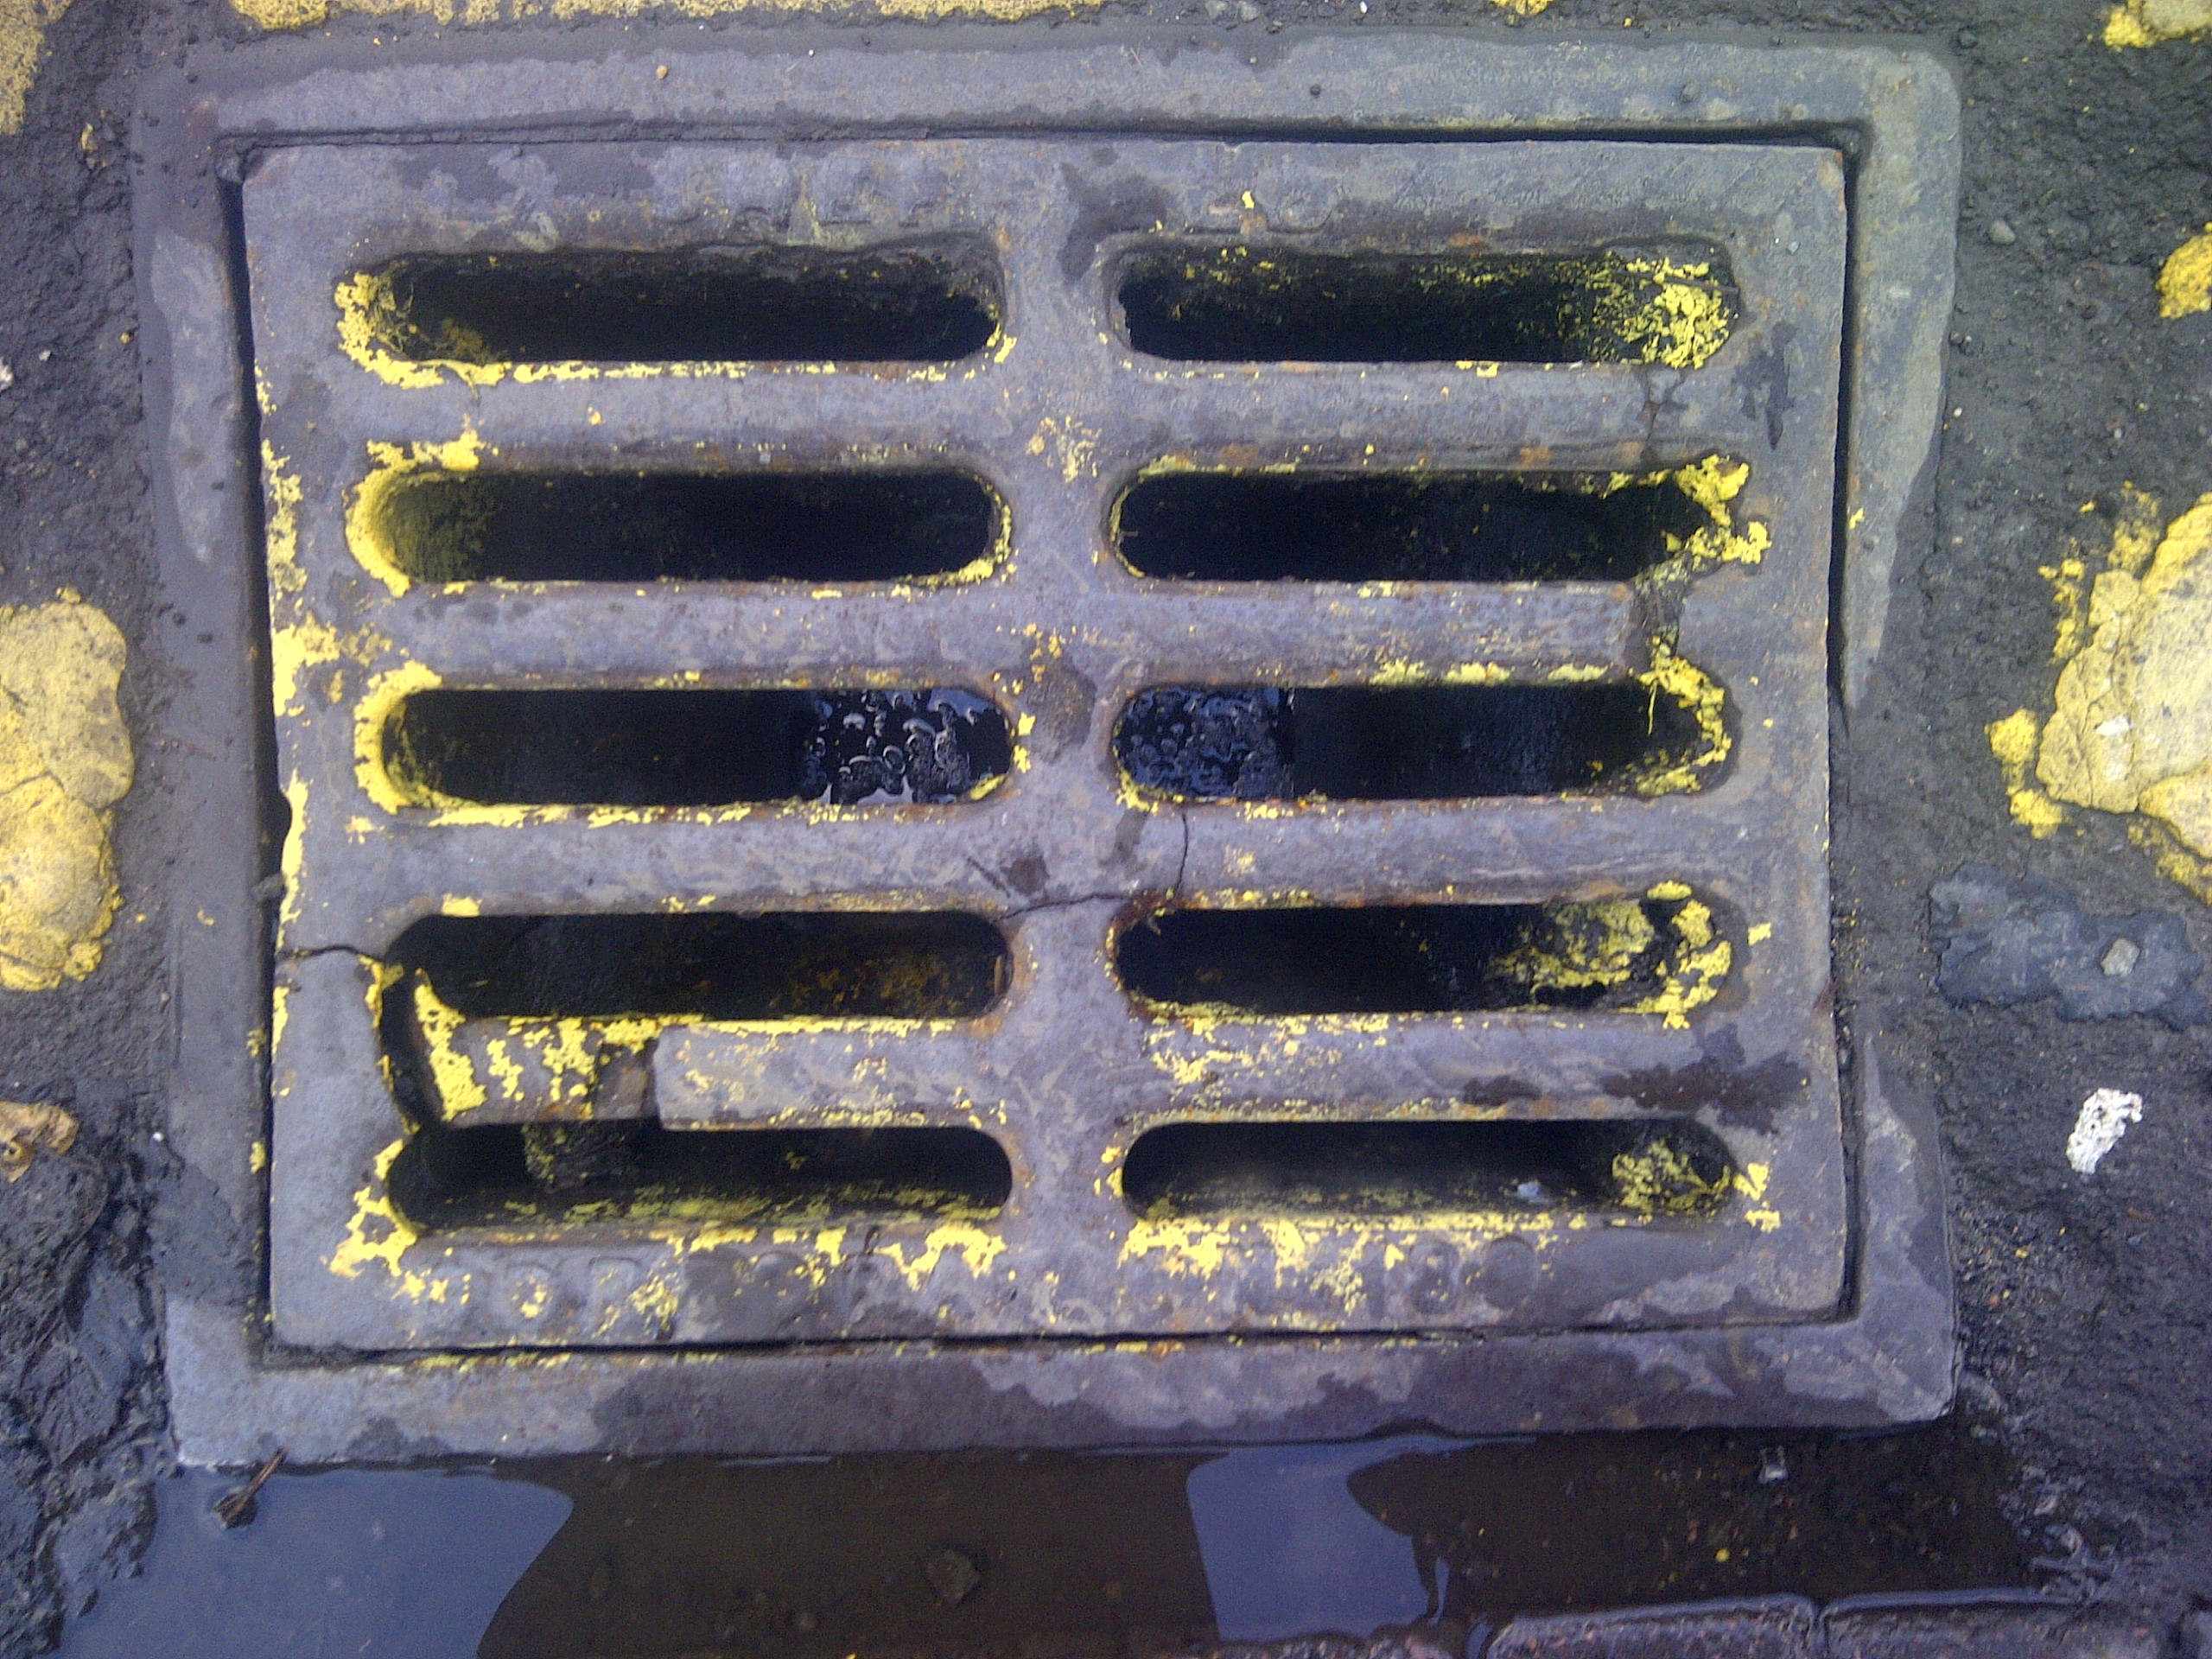 It seems that the design of drain cover changed during the mid 1890s to this larger, flatter and more square type. Helpfully the corporation also started dating their drains at this time. Does this one read 1895? If so it's the earliest one we've found.